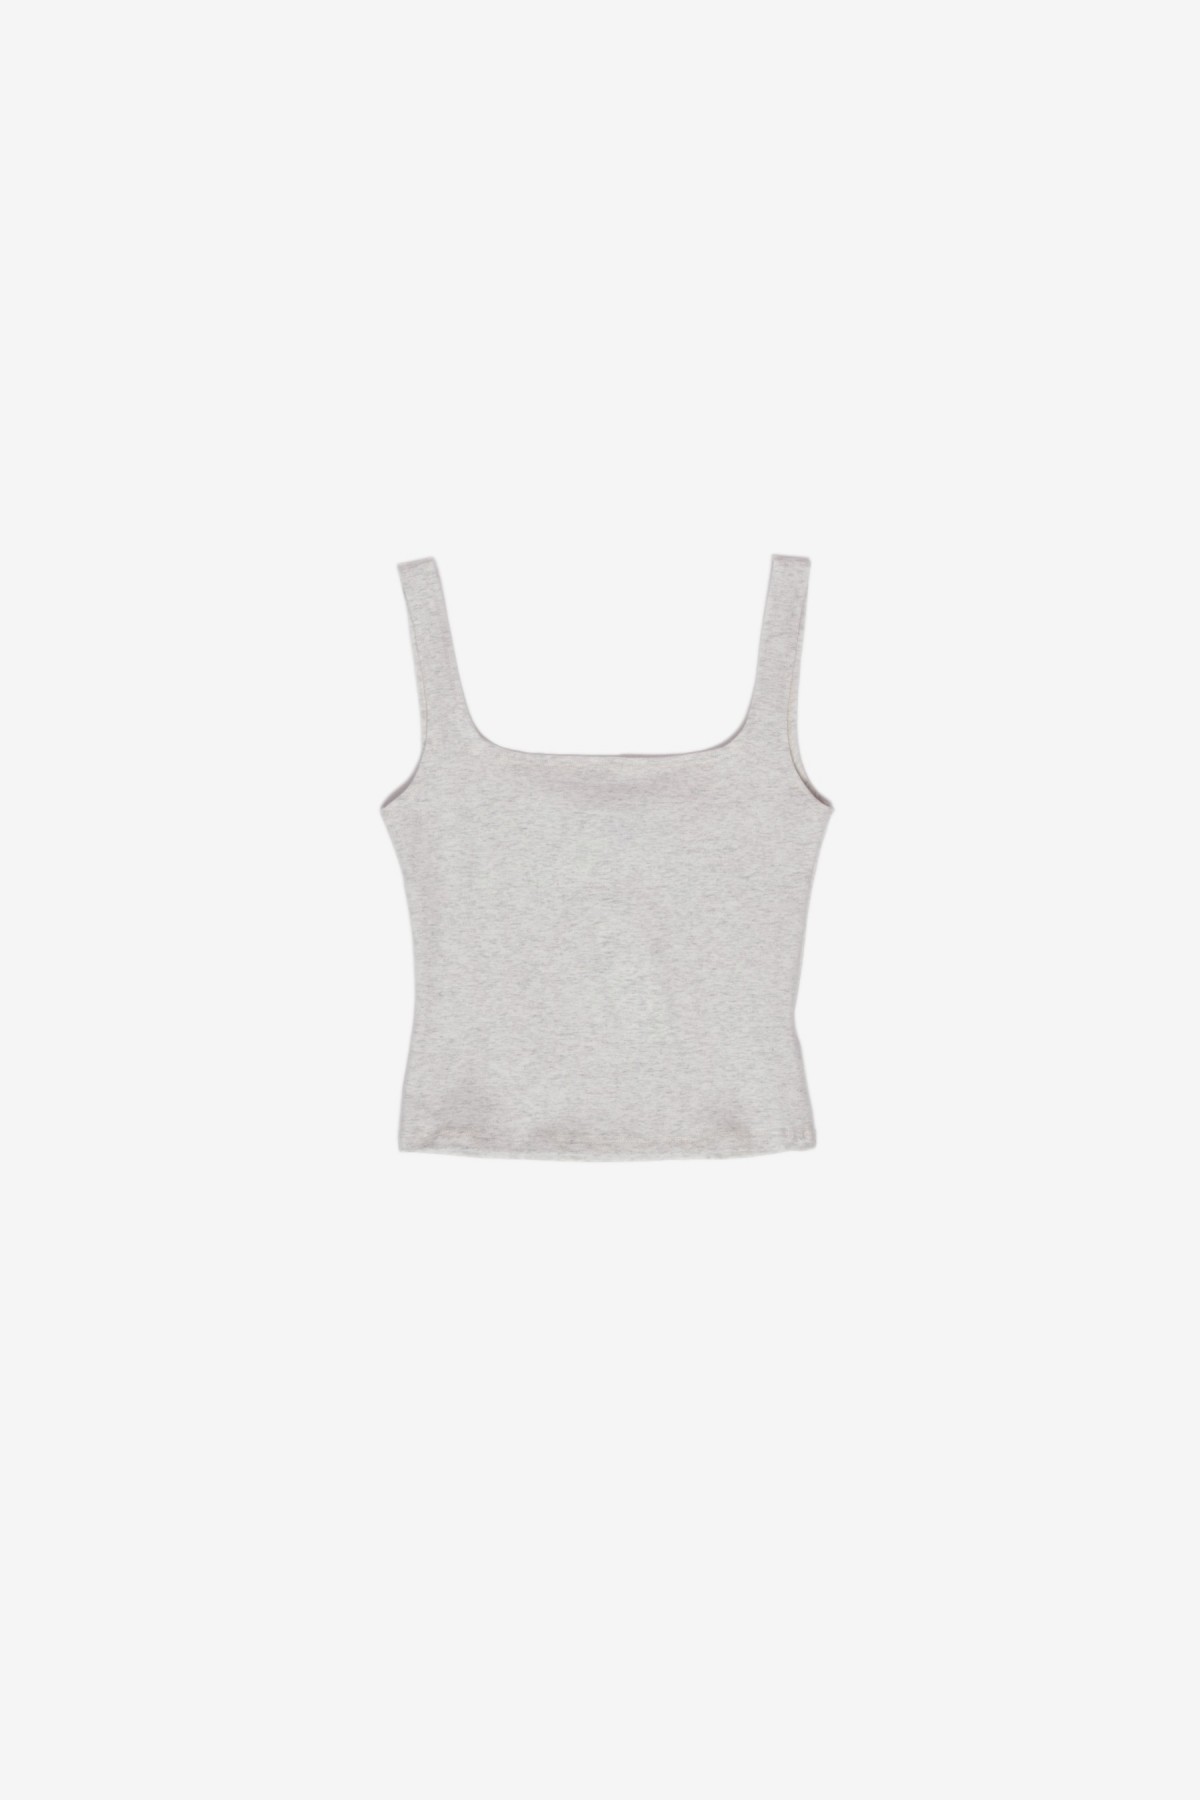 Gil Rodriguez Matisse Scooped Tank in Ash Grey